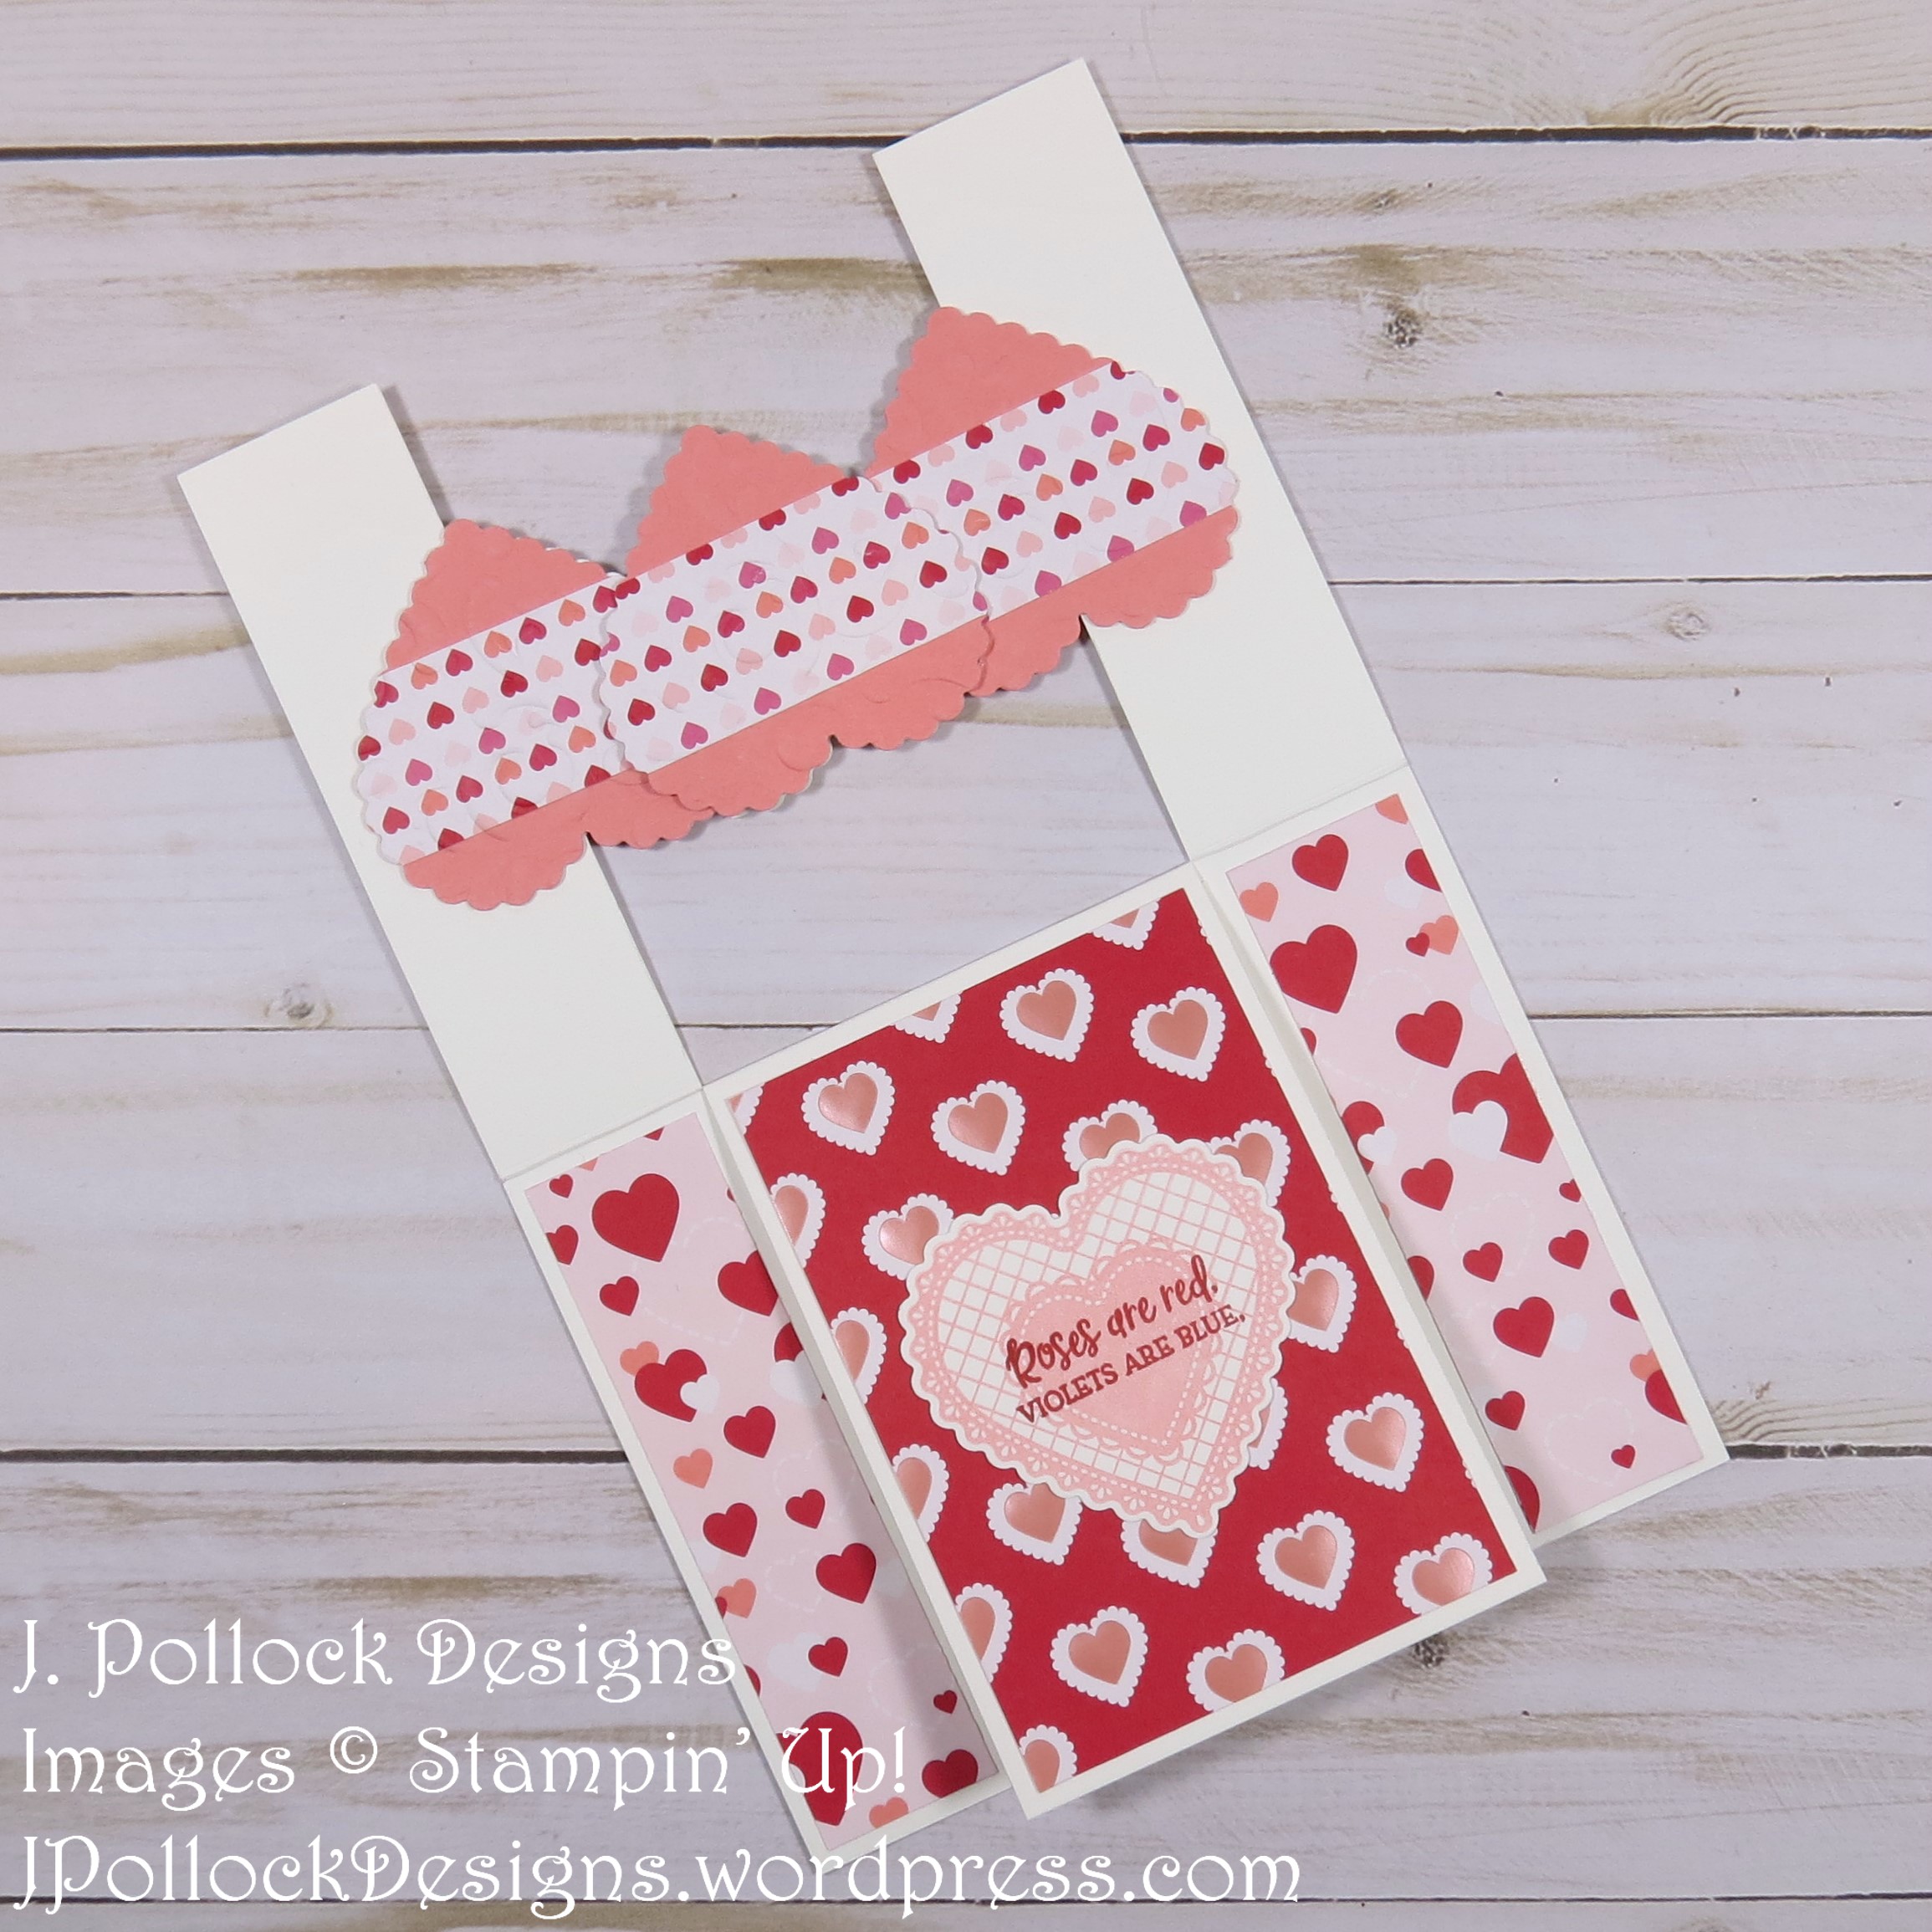 J. Pollock Designs - Stampin' Up! - From My Heart Suite, Heartfelt